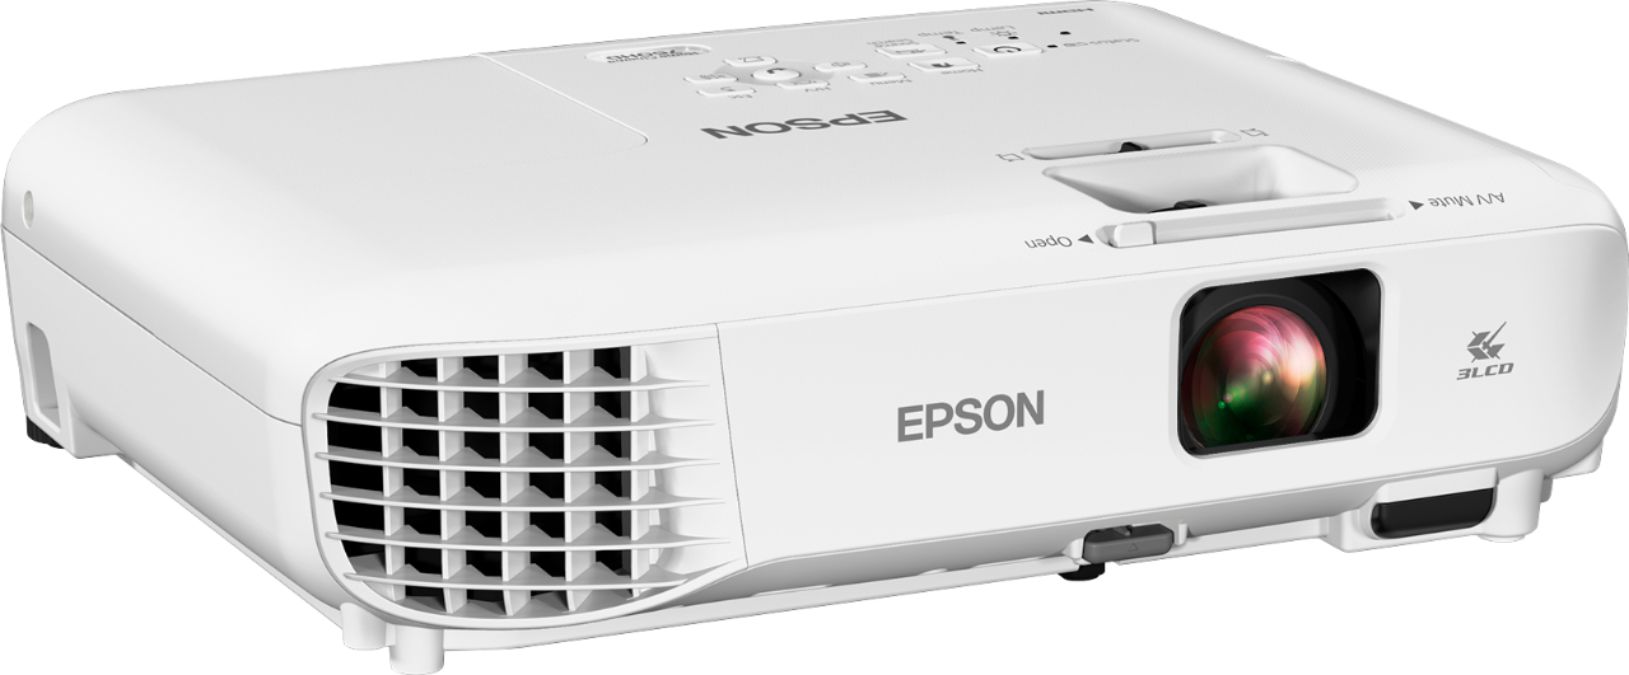 Customer Reviews: Epson Home Cinema 760HD 720p 3LCD Projector White